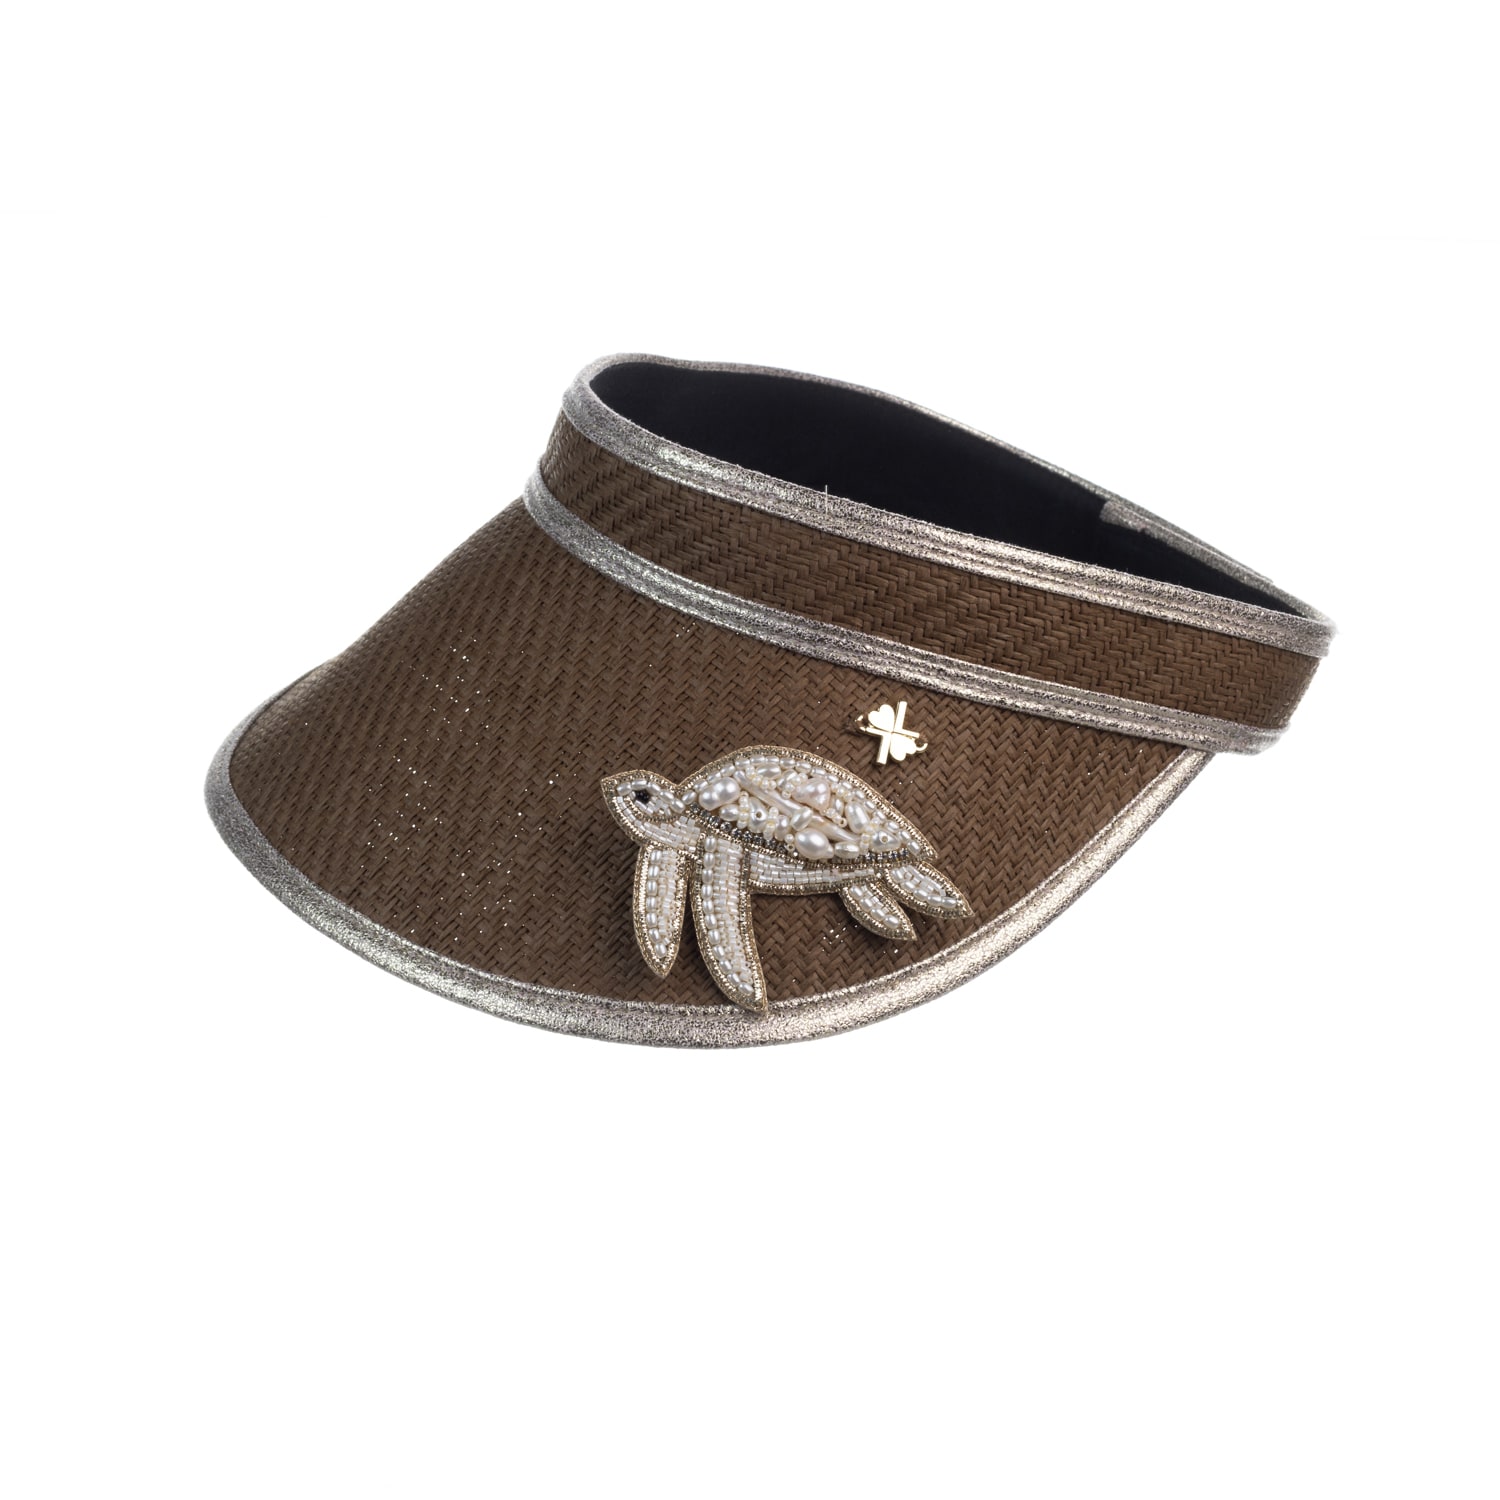 Laines London Women's Brown Straw Woven Visor With Beaded Turtle Brooch - Toffee